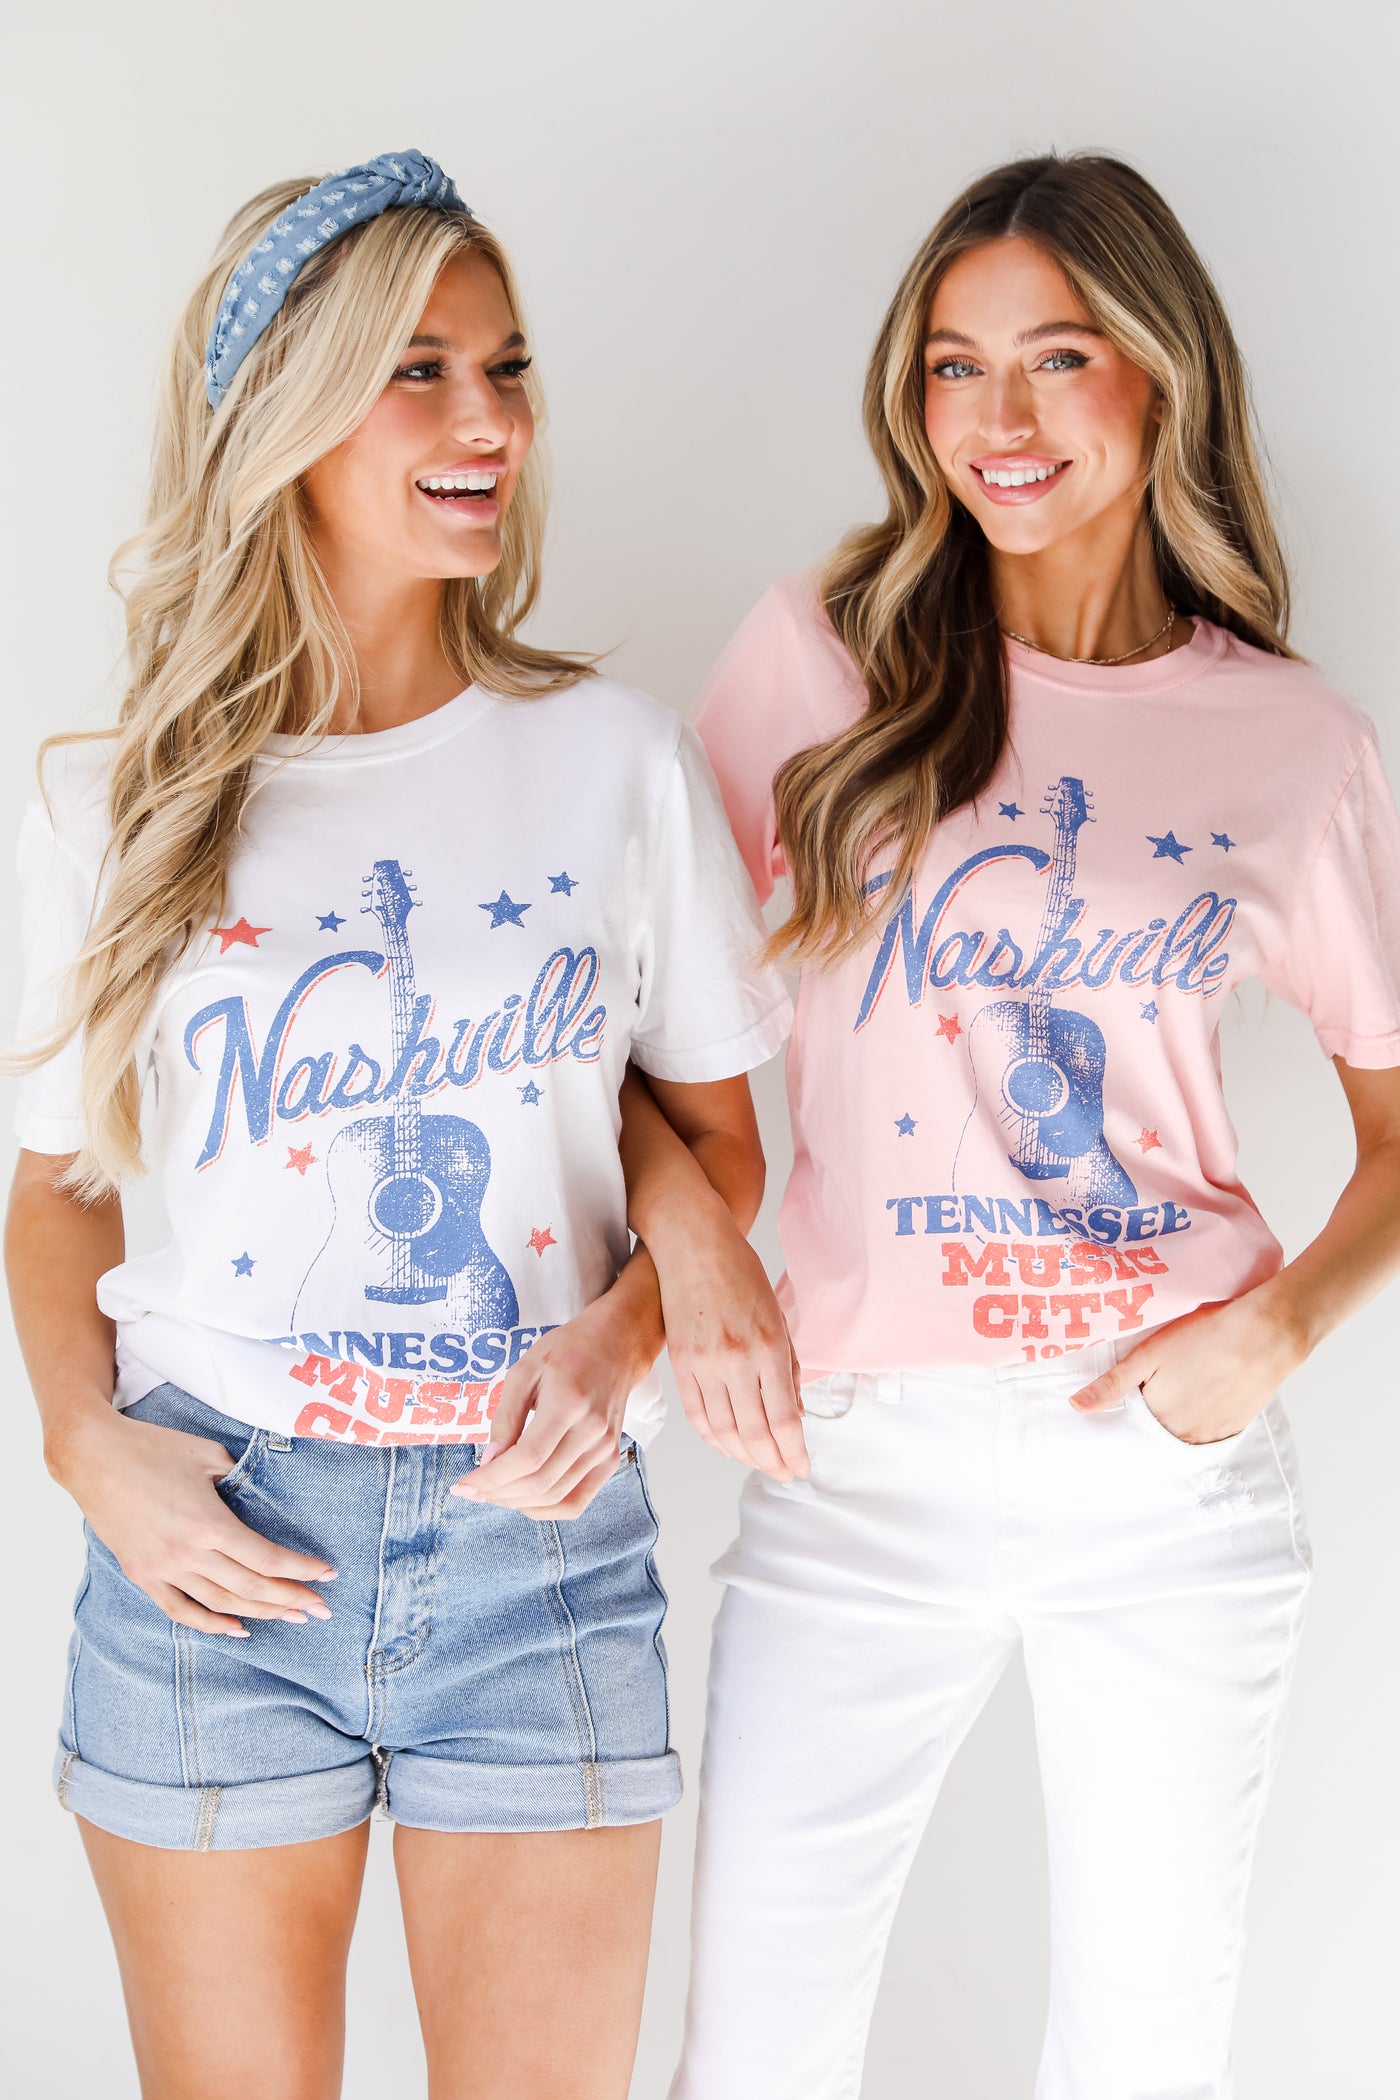 Nashville Tennessee Music City Graphic Tees